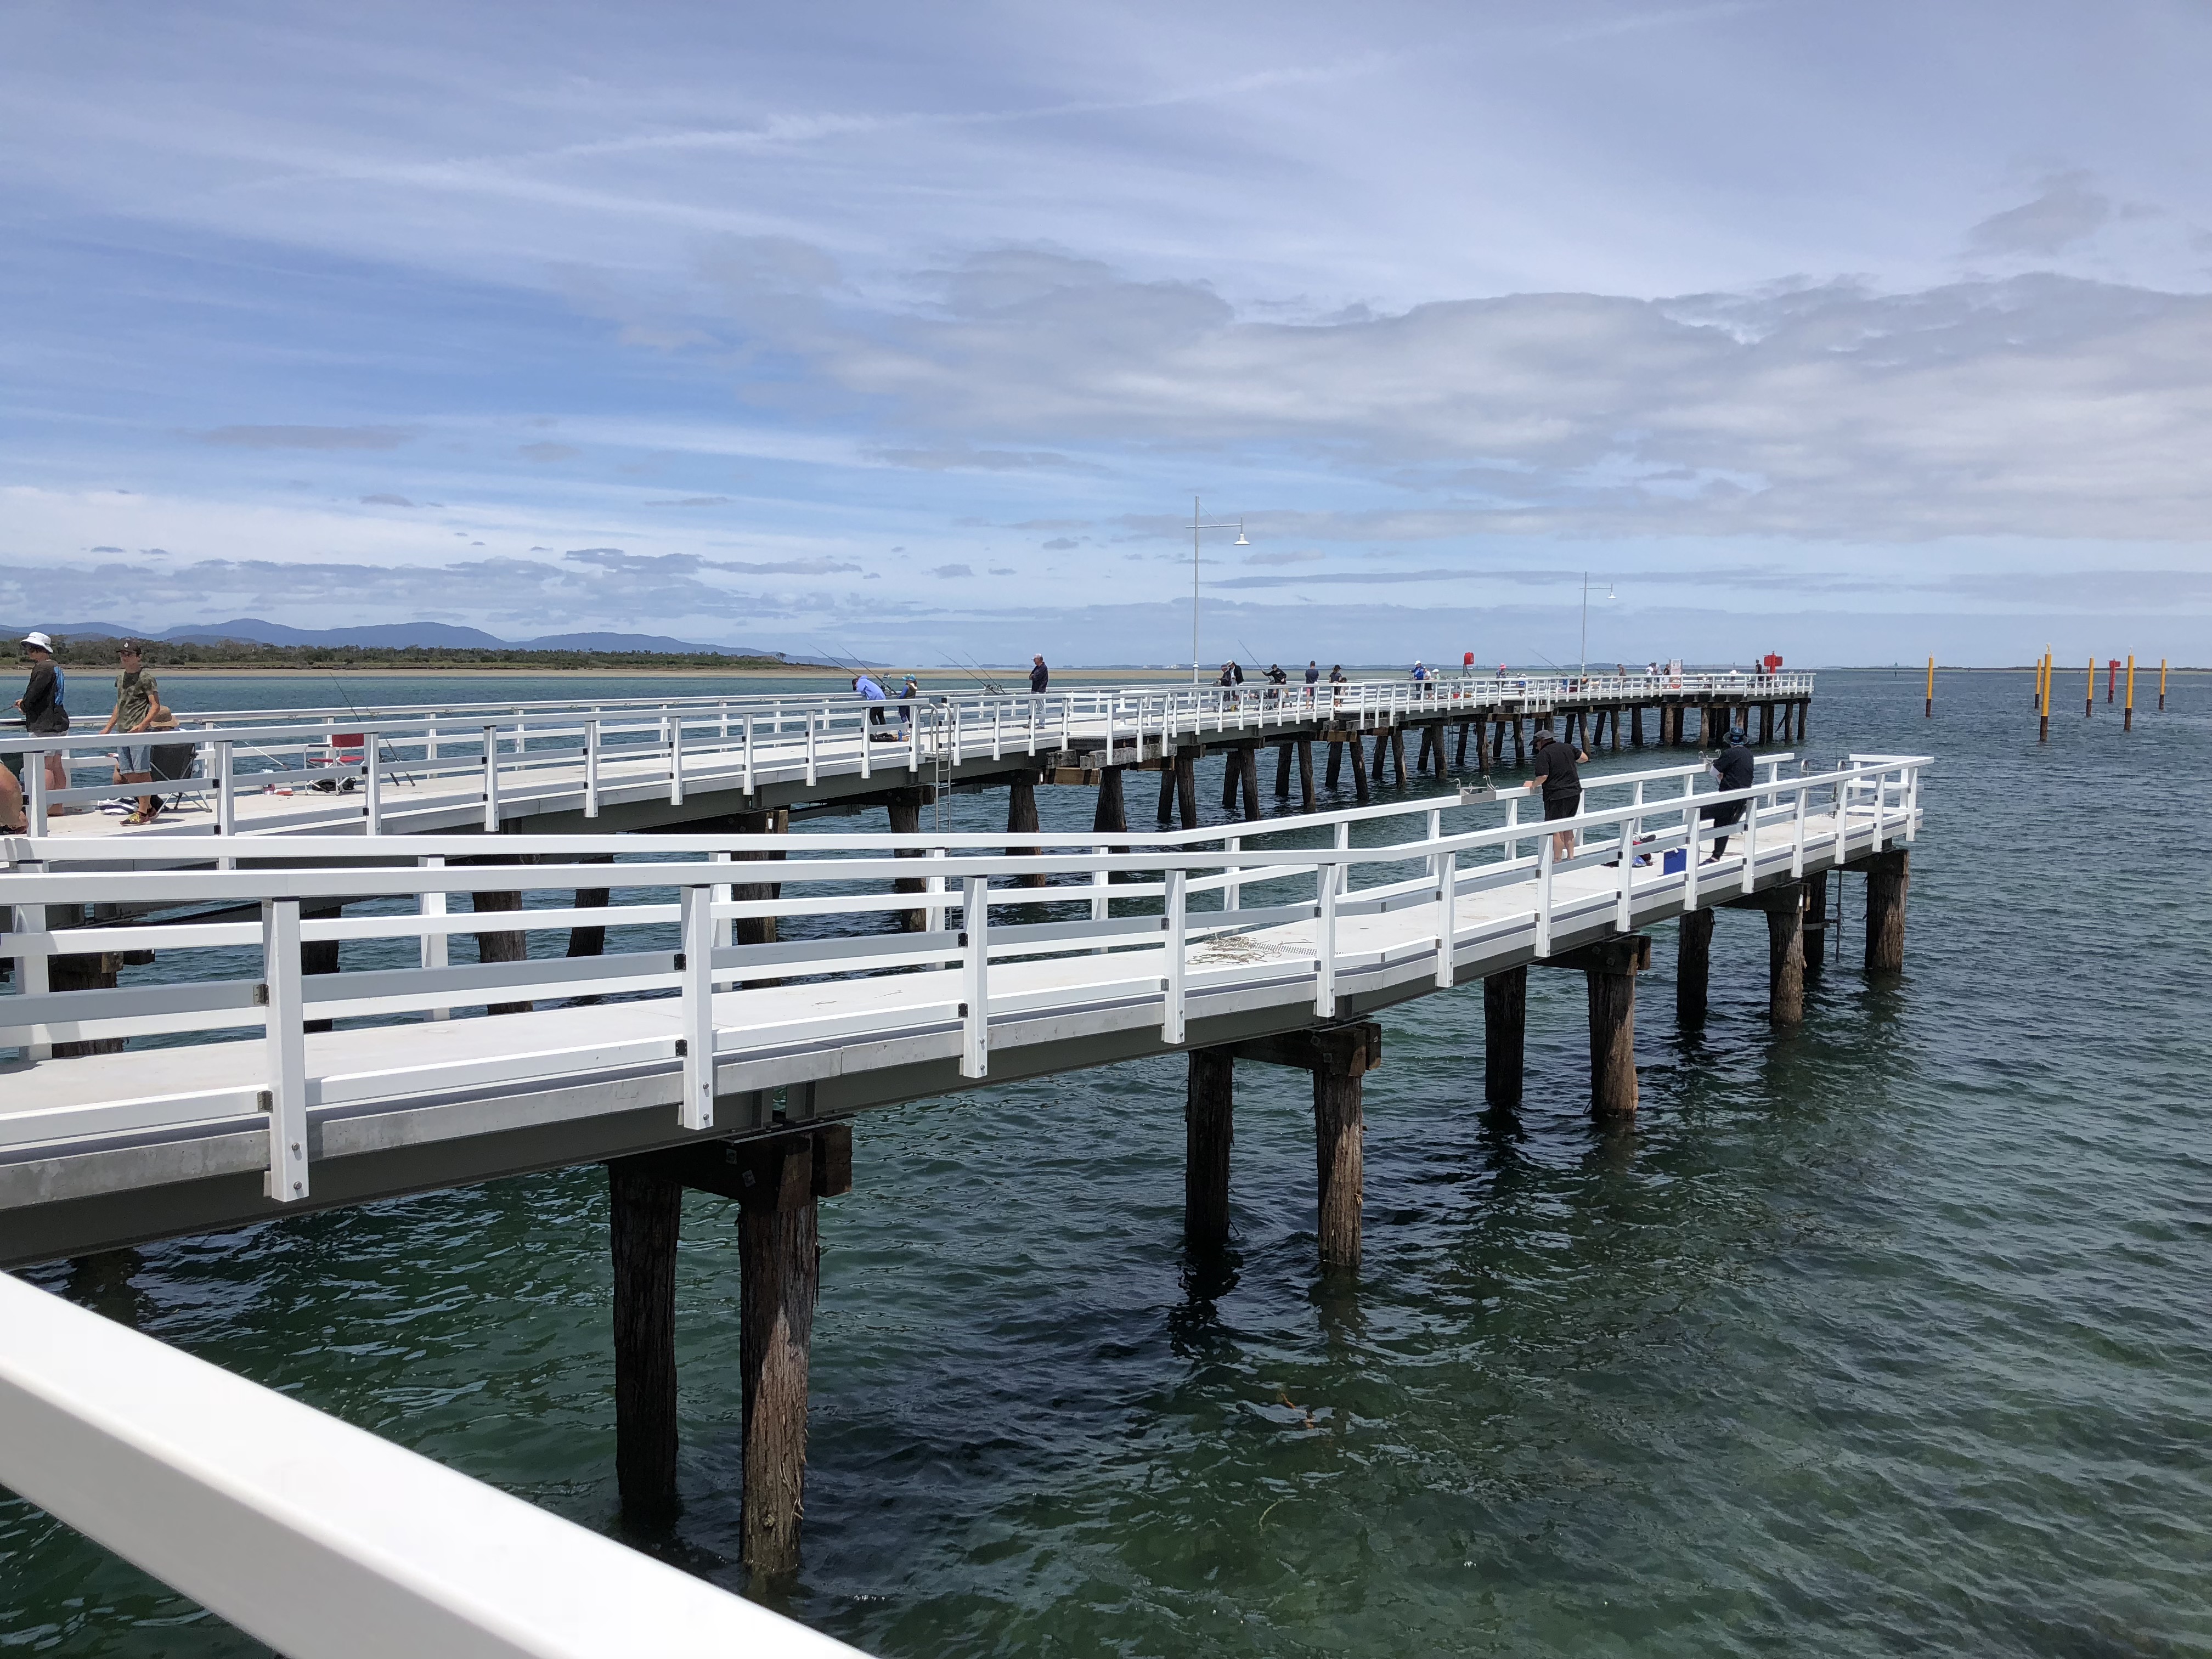 Many visitors have flocked to the newly refurbished Long Jetty